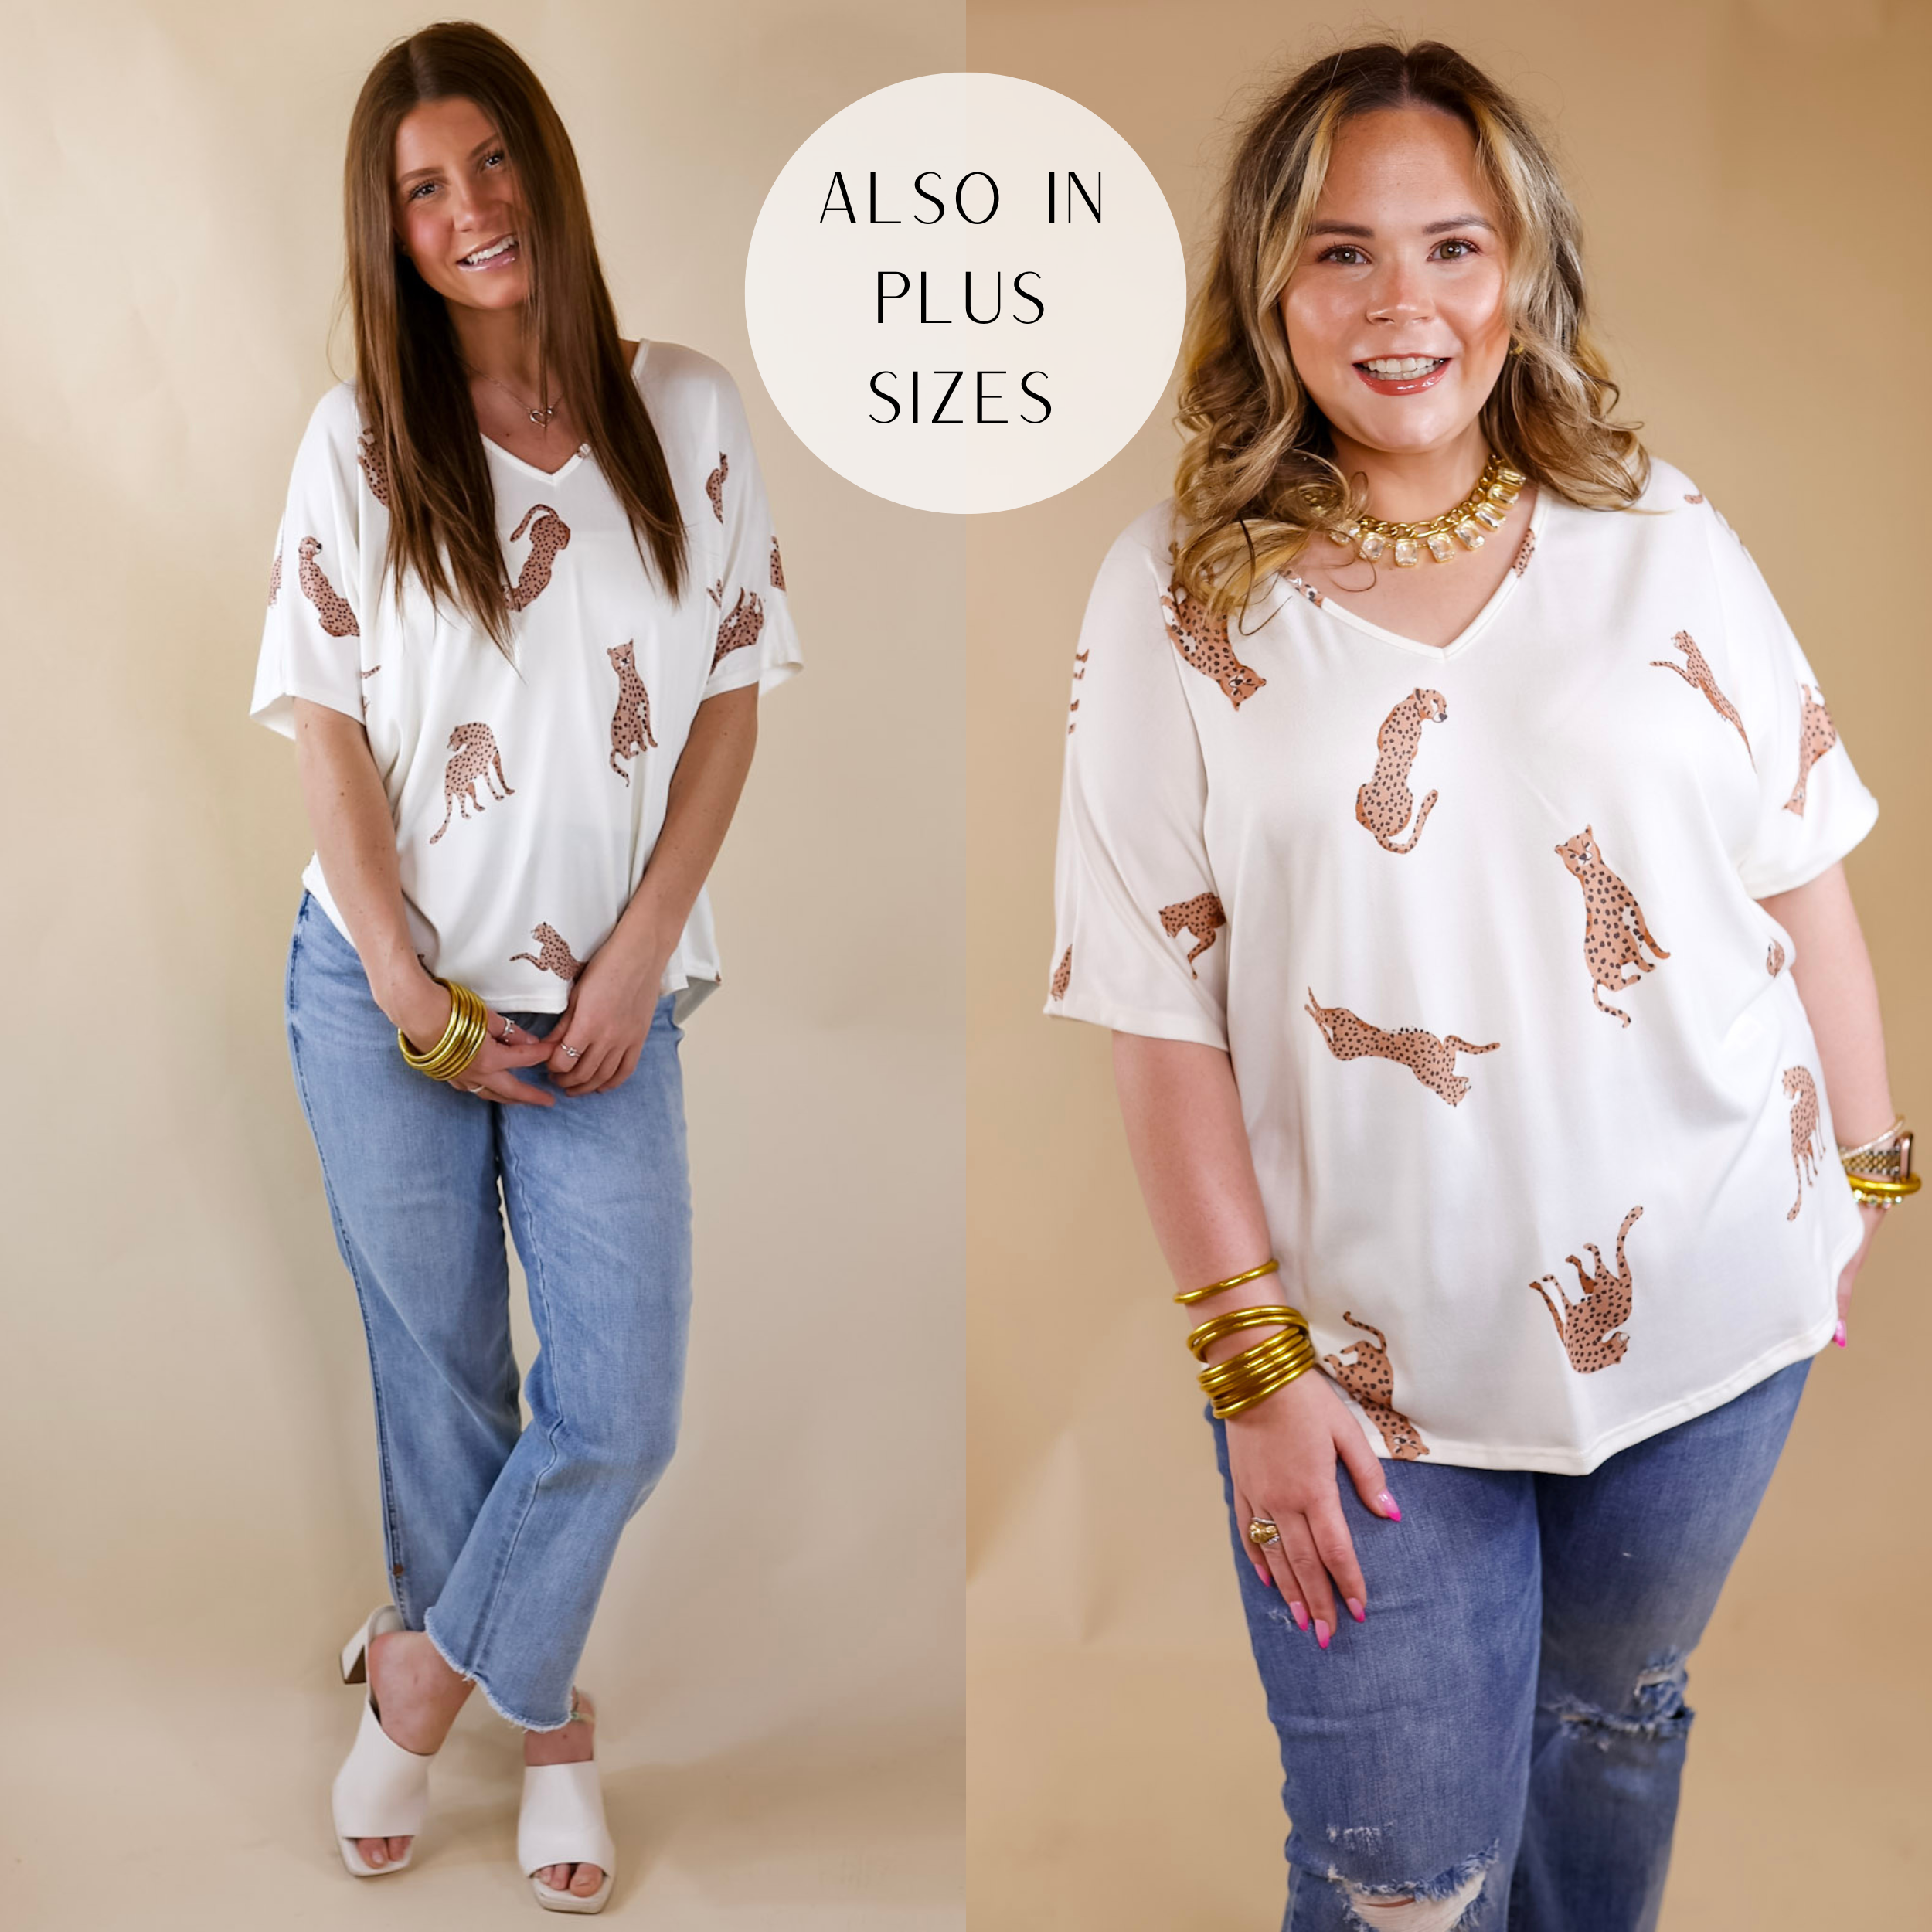 Models are wearing an ivory v neck top with short sleeves and cheetahs printed all over. Size small model has it paired with light wash jeans and ivory heels. Size large model has it paired with distressed jeans and gold jewelry..